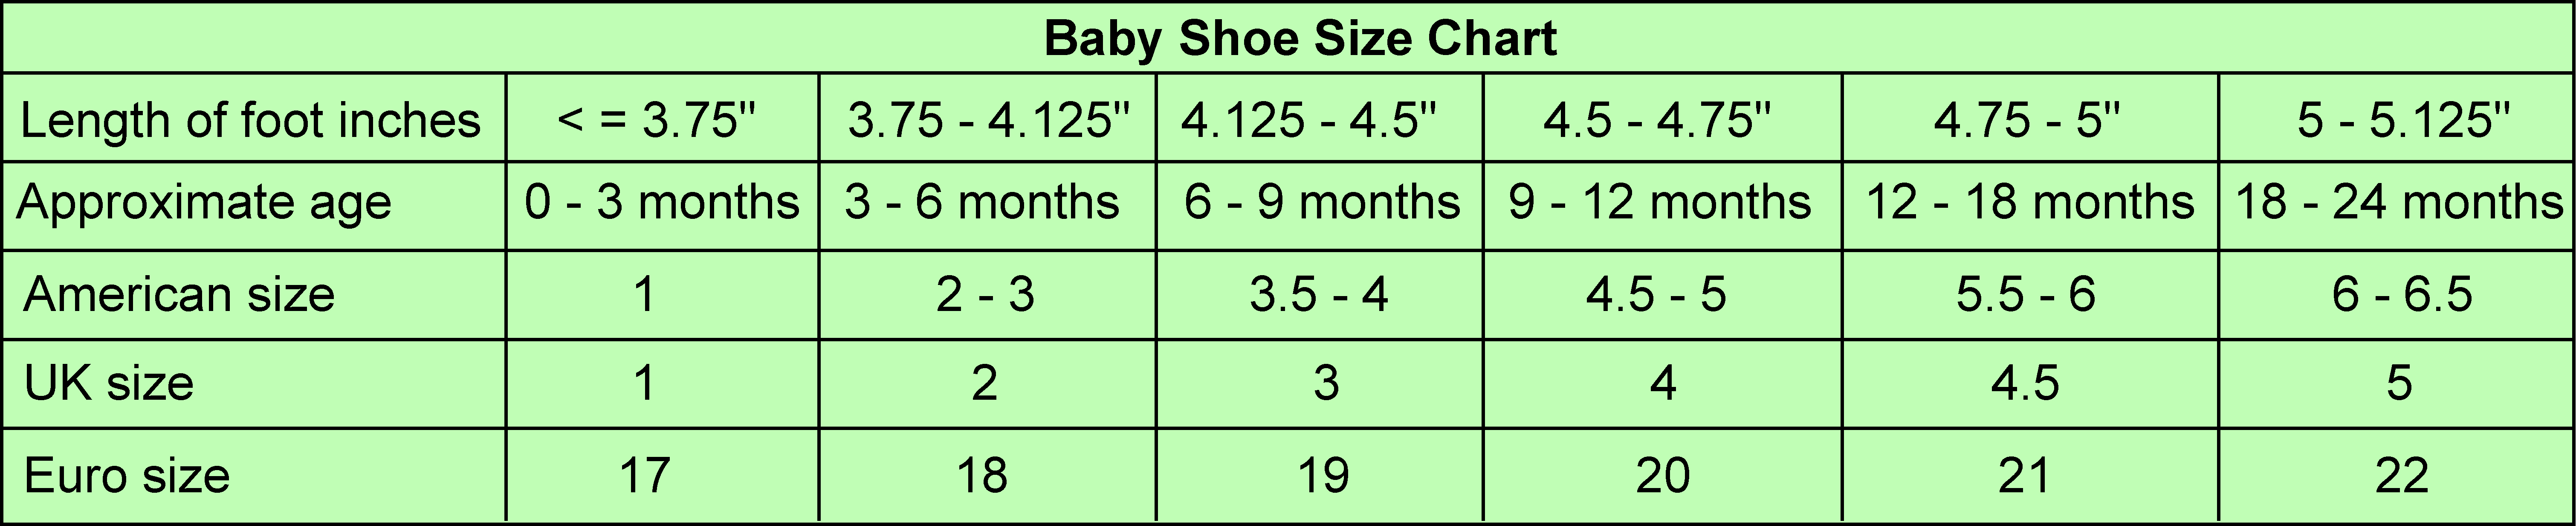 Shoe sizes for babies